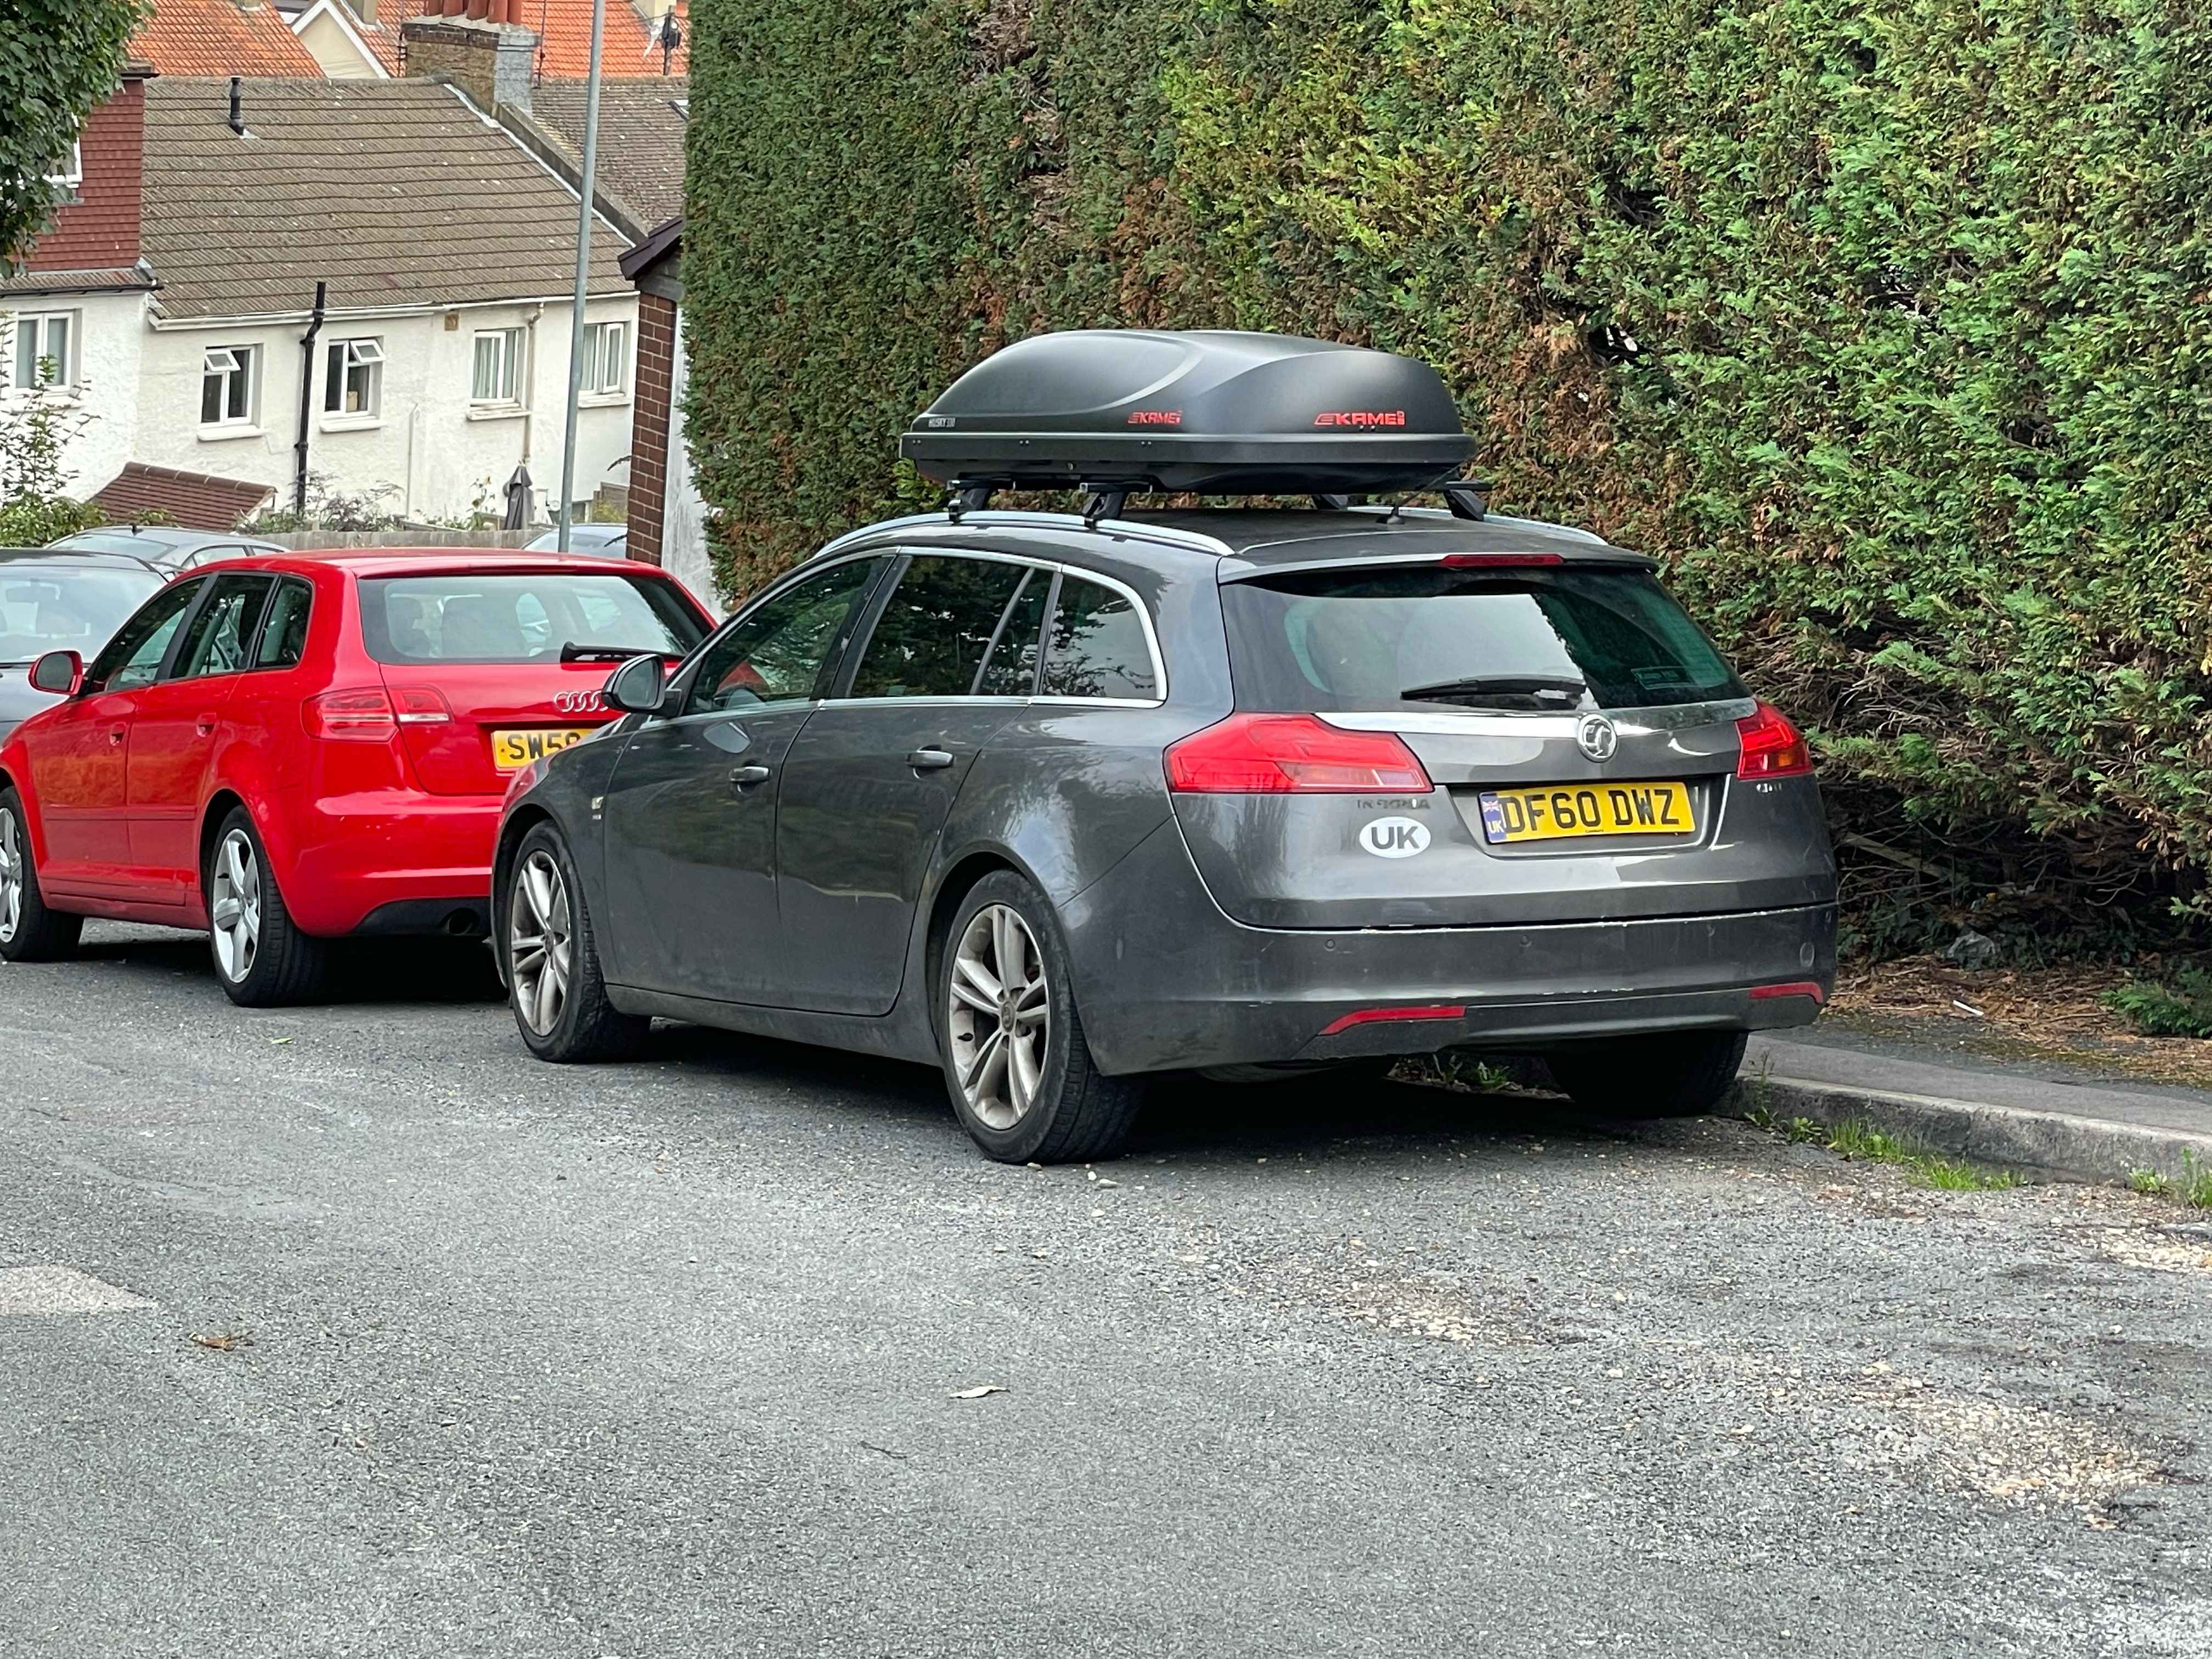 Photograph of DF60 DWZ - a Grey Vauxhall Insignia parked in Hollingdean by a non-resident. The first of nine photographs supplied by the residents of Hollingdean.